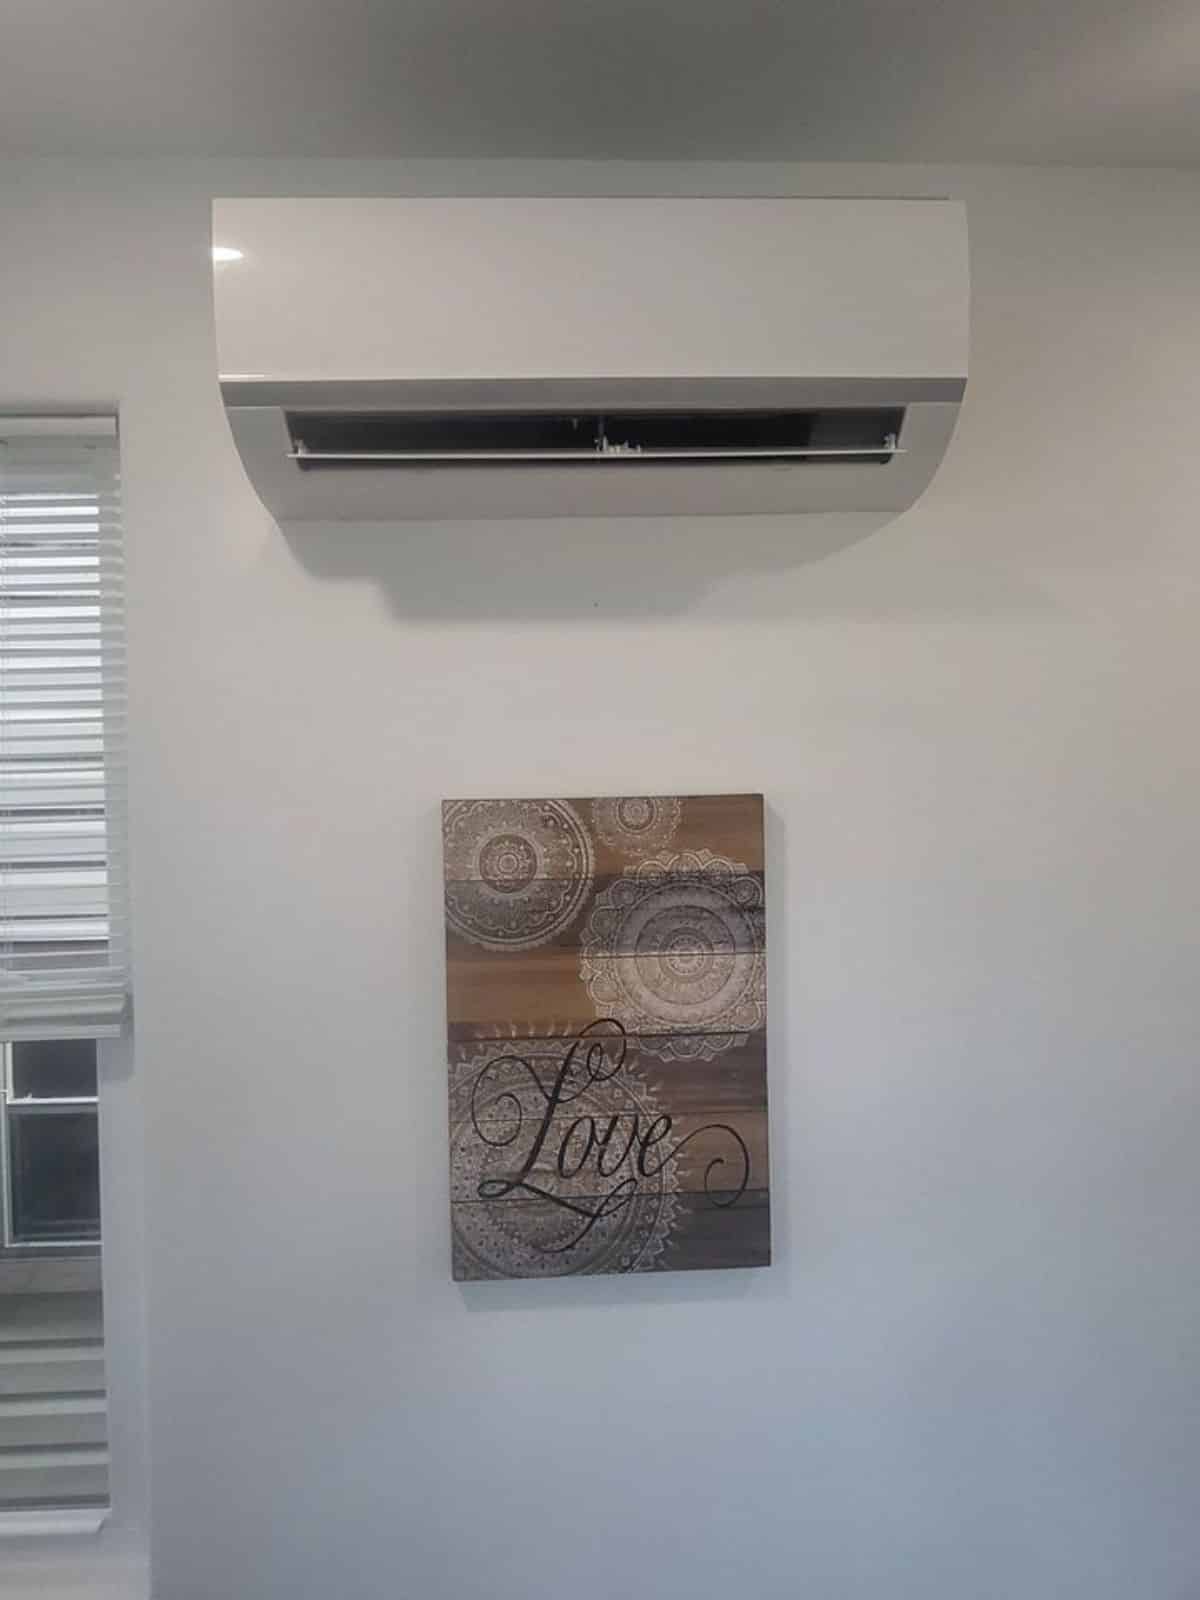 Air condition unit is installed in living area of comfortable tiny home